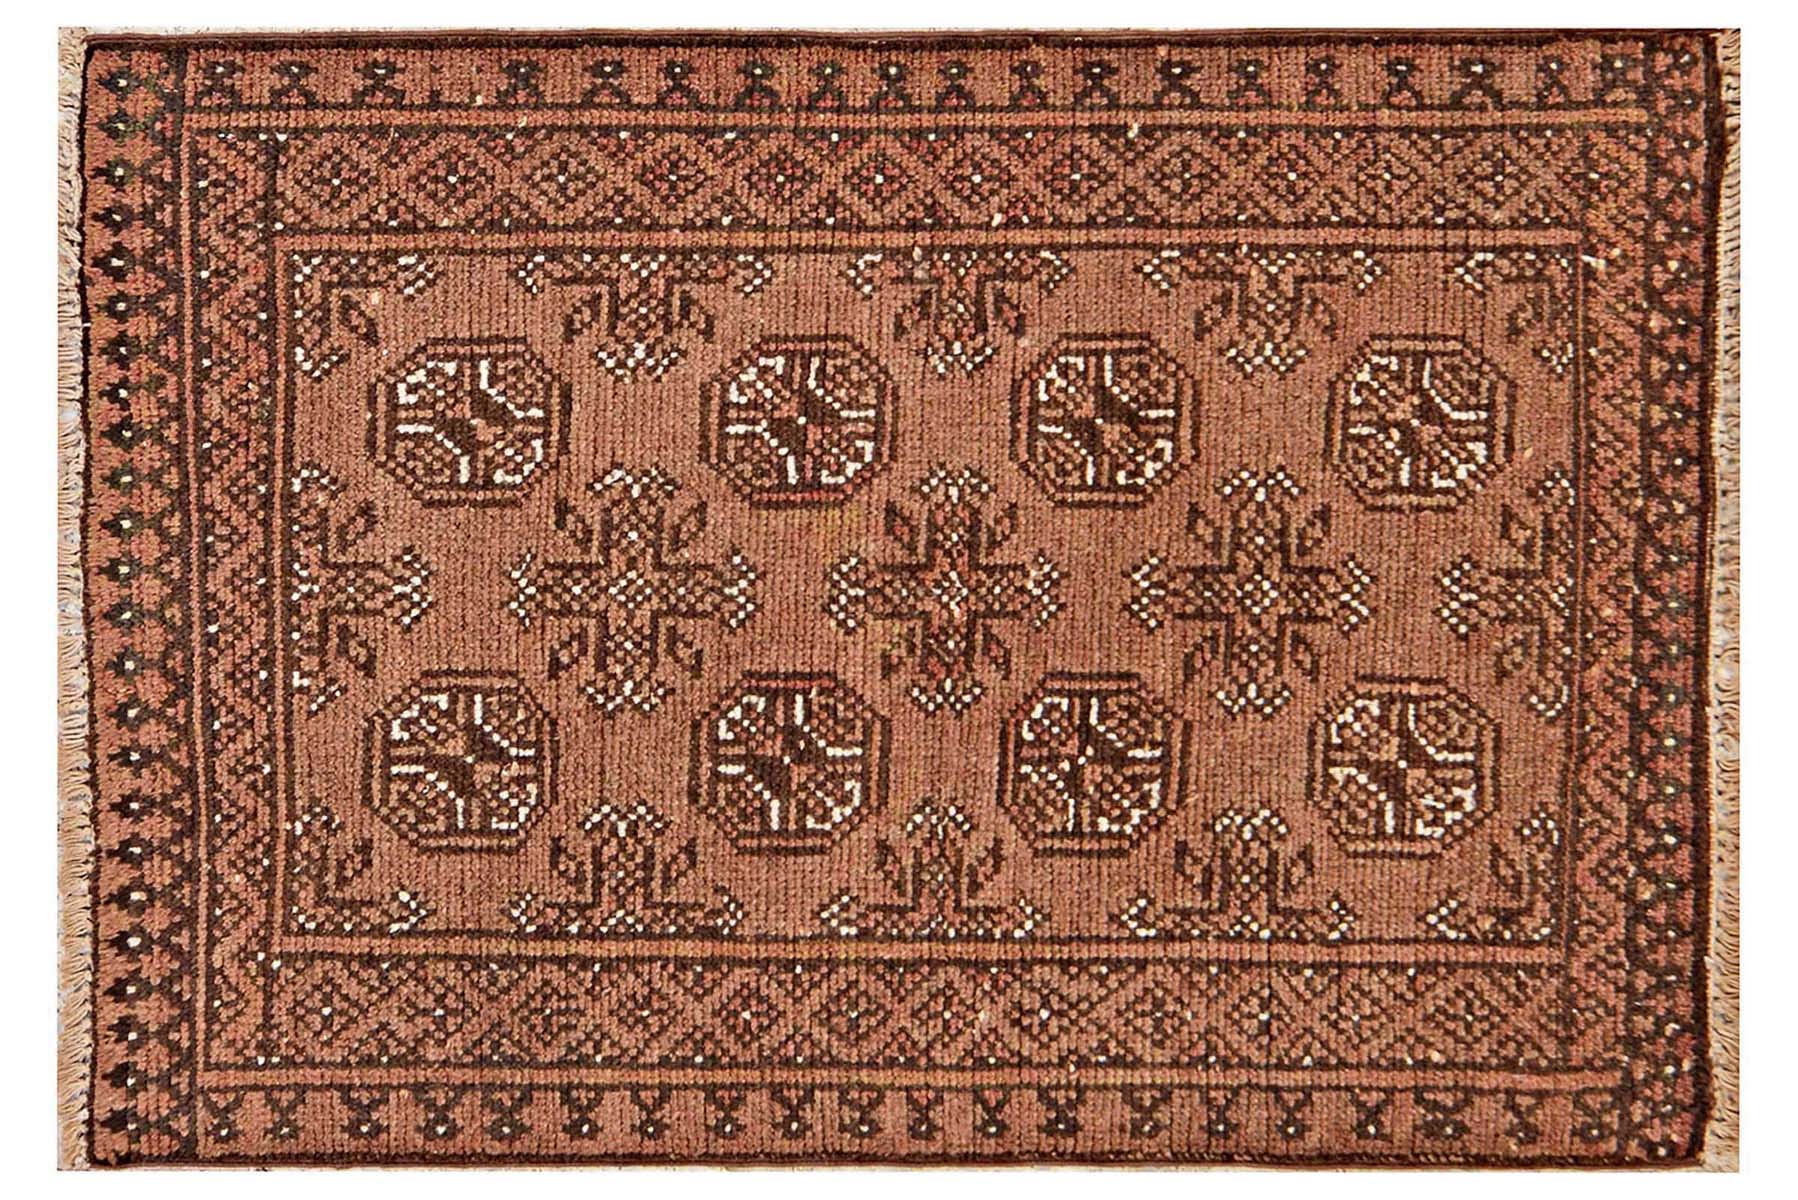 Afghan Aqcha carpet 70 x 110 hand knotted brown geometric Orient short pile b 